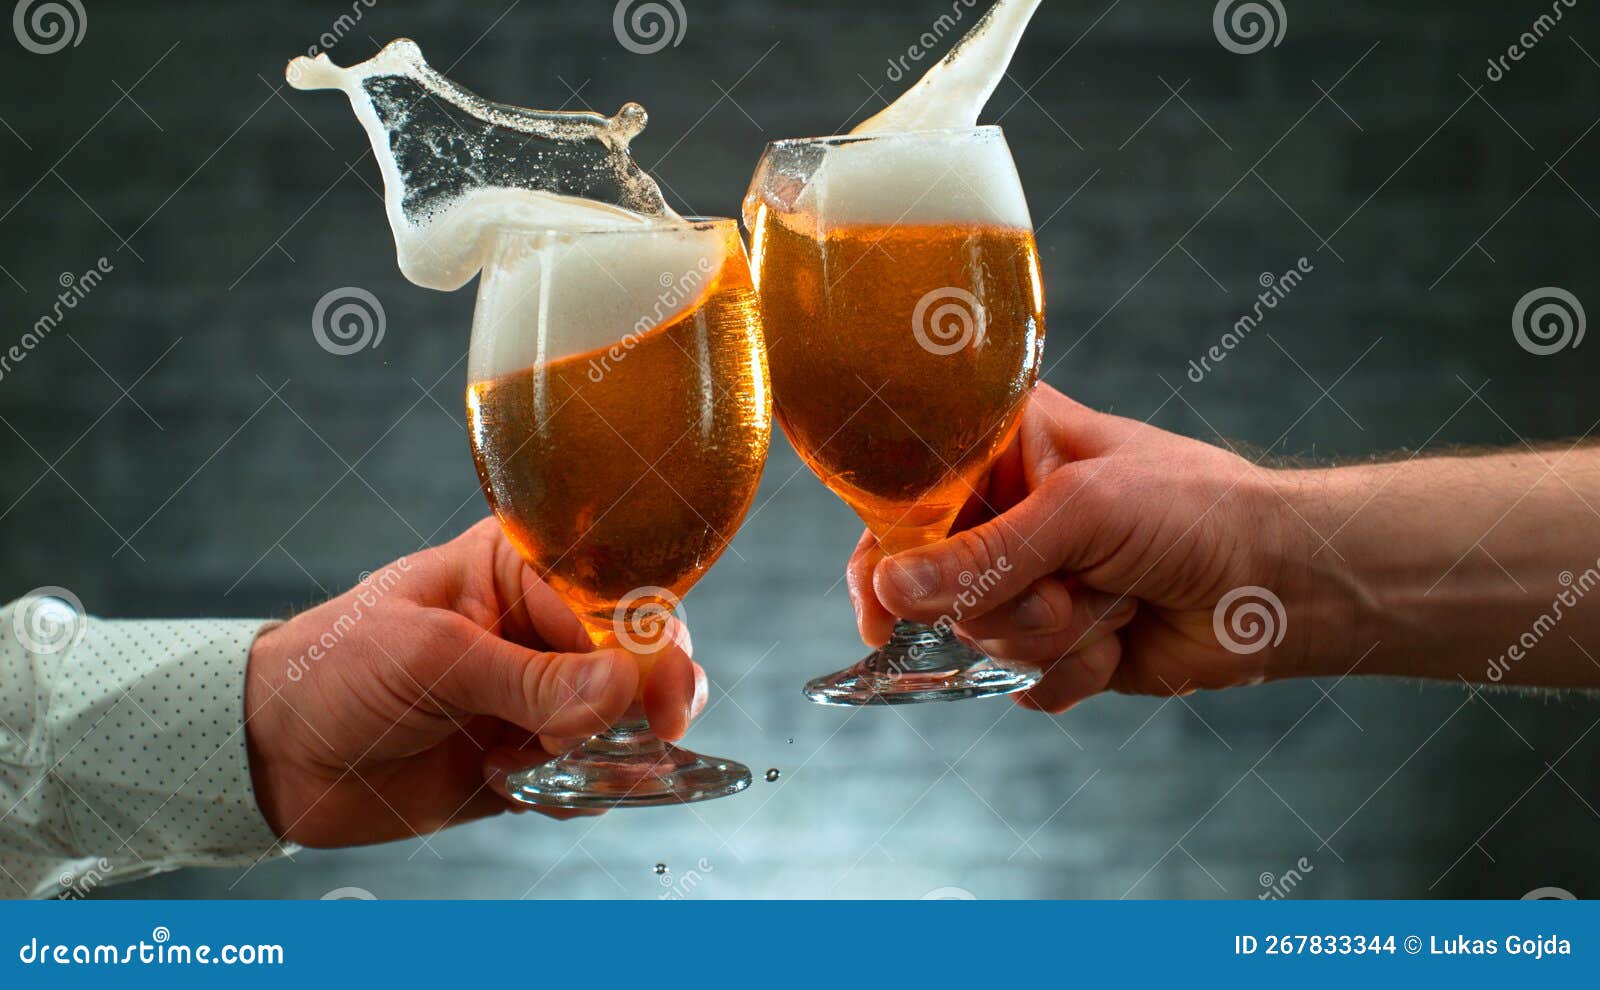 https://thumbs.dreamstime.com/z/freeze-motion-shot-clinking-two-glasses-beer-close-up-267833344.jpg